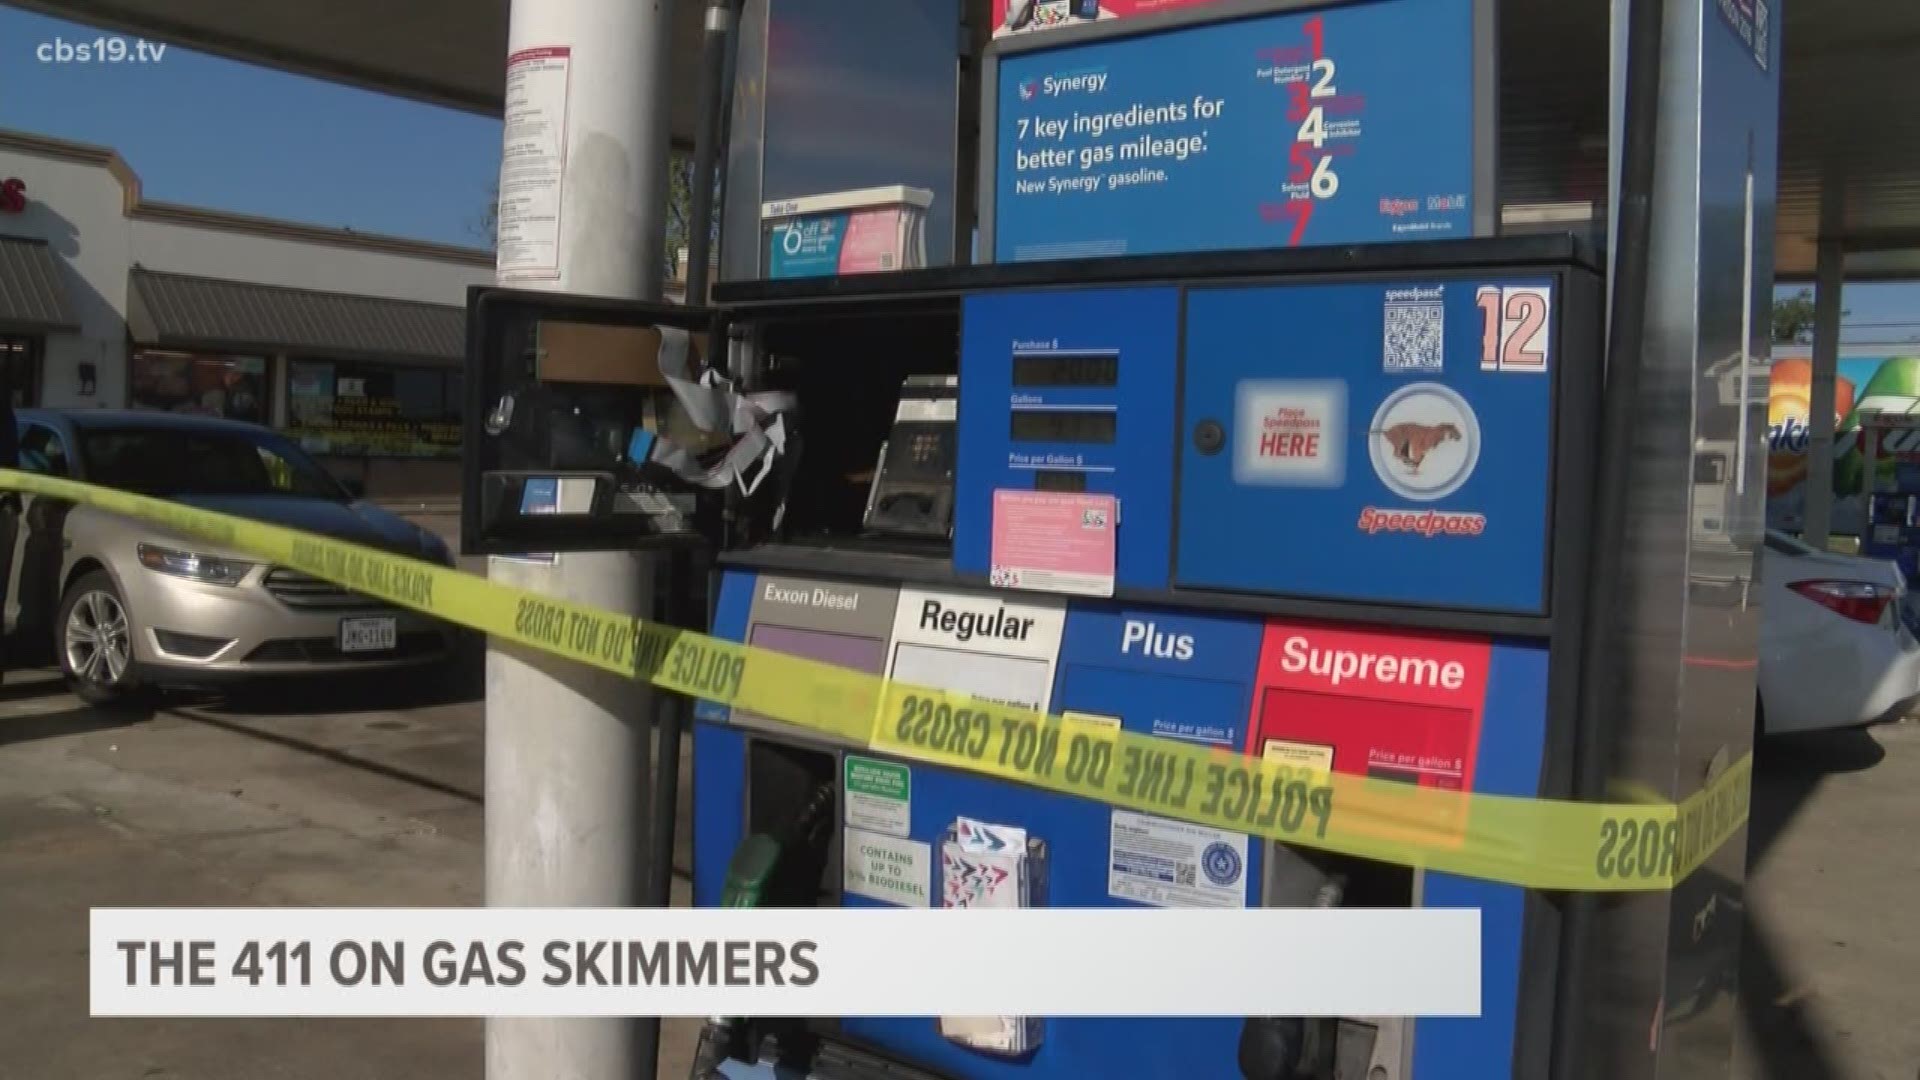 With gas skimming becoming more common, there are steps you can take to protect yourself.